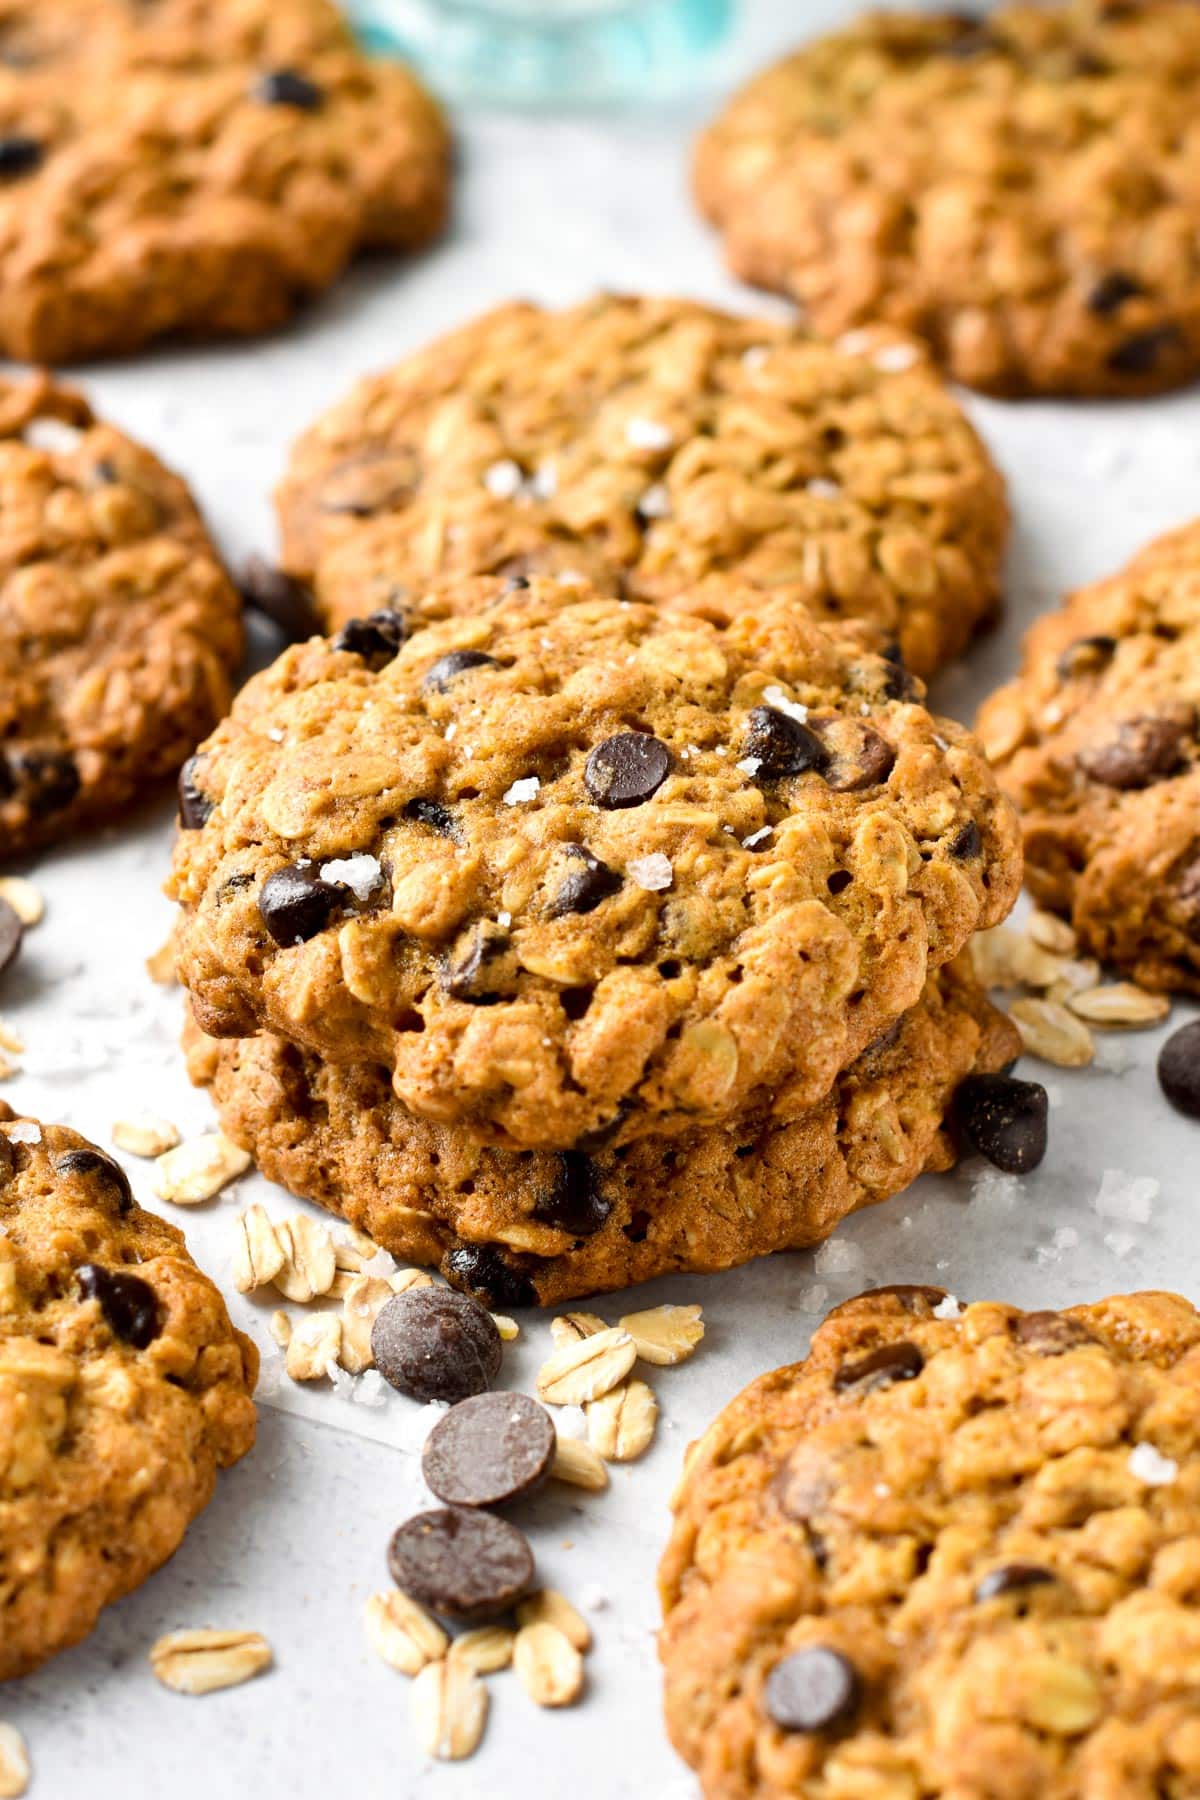 These Vegan Oatmeal Chocolate Chip Cookies are soft and chewy with crispy edges and packed with healthy proteins and fiber from oats. They are definitely the easiest healthy breakfast cookies on the go.These Vegan Oatmeal Chocolate Chip Cookies are soft and chewy with crispy edges and packed with healthy proteins and fiber from oats. They are definitely the easiest healthy breakfast cookies on the go.